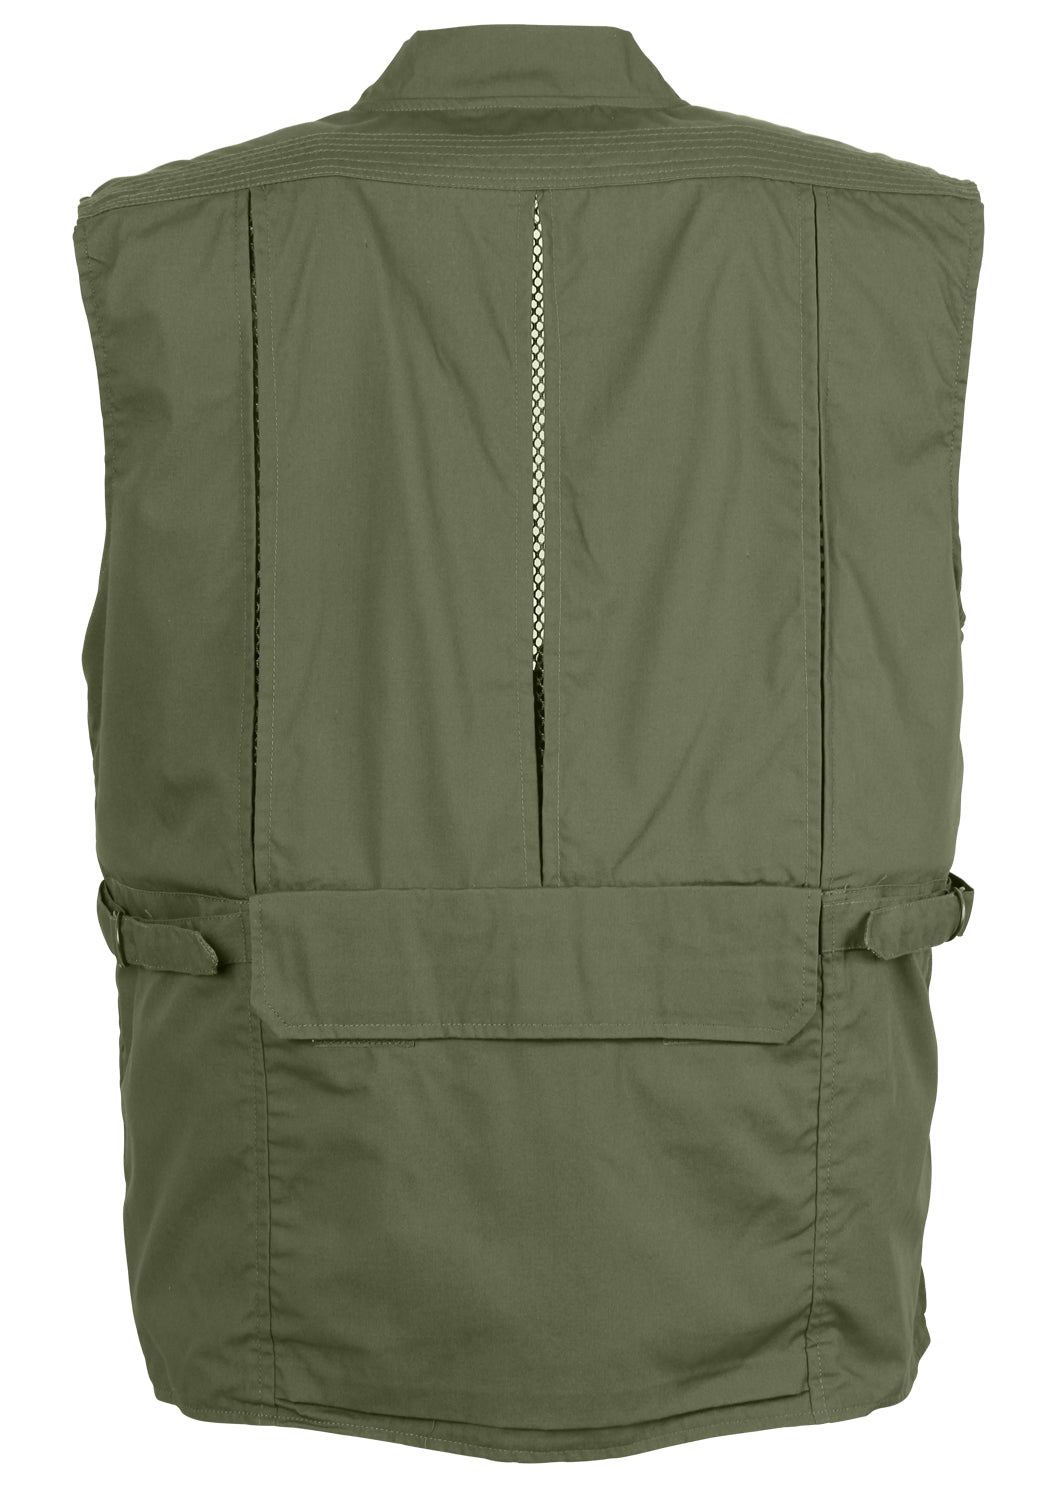 Concealed Carry Vest - Plainclothes by Rothco